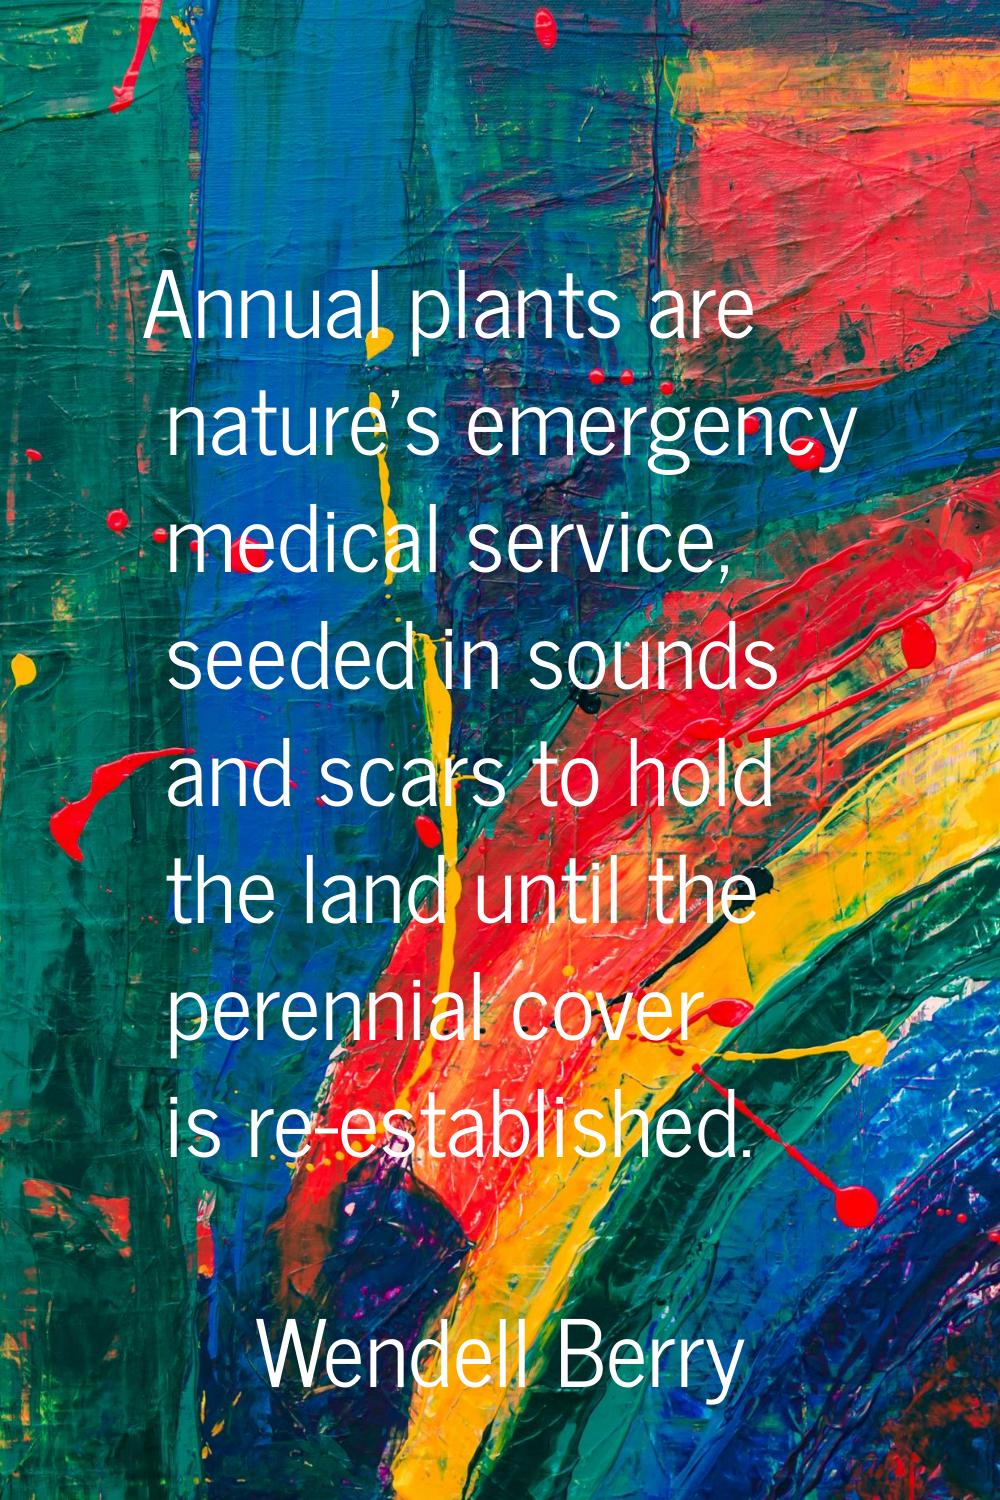 Annual plants are nature's emergency medical service, seeded in sounds and scars to hold the land u